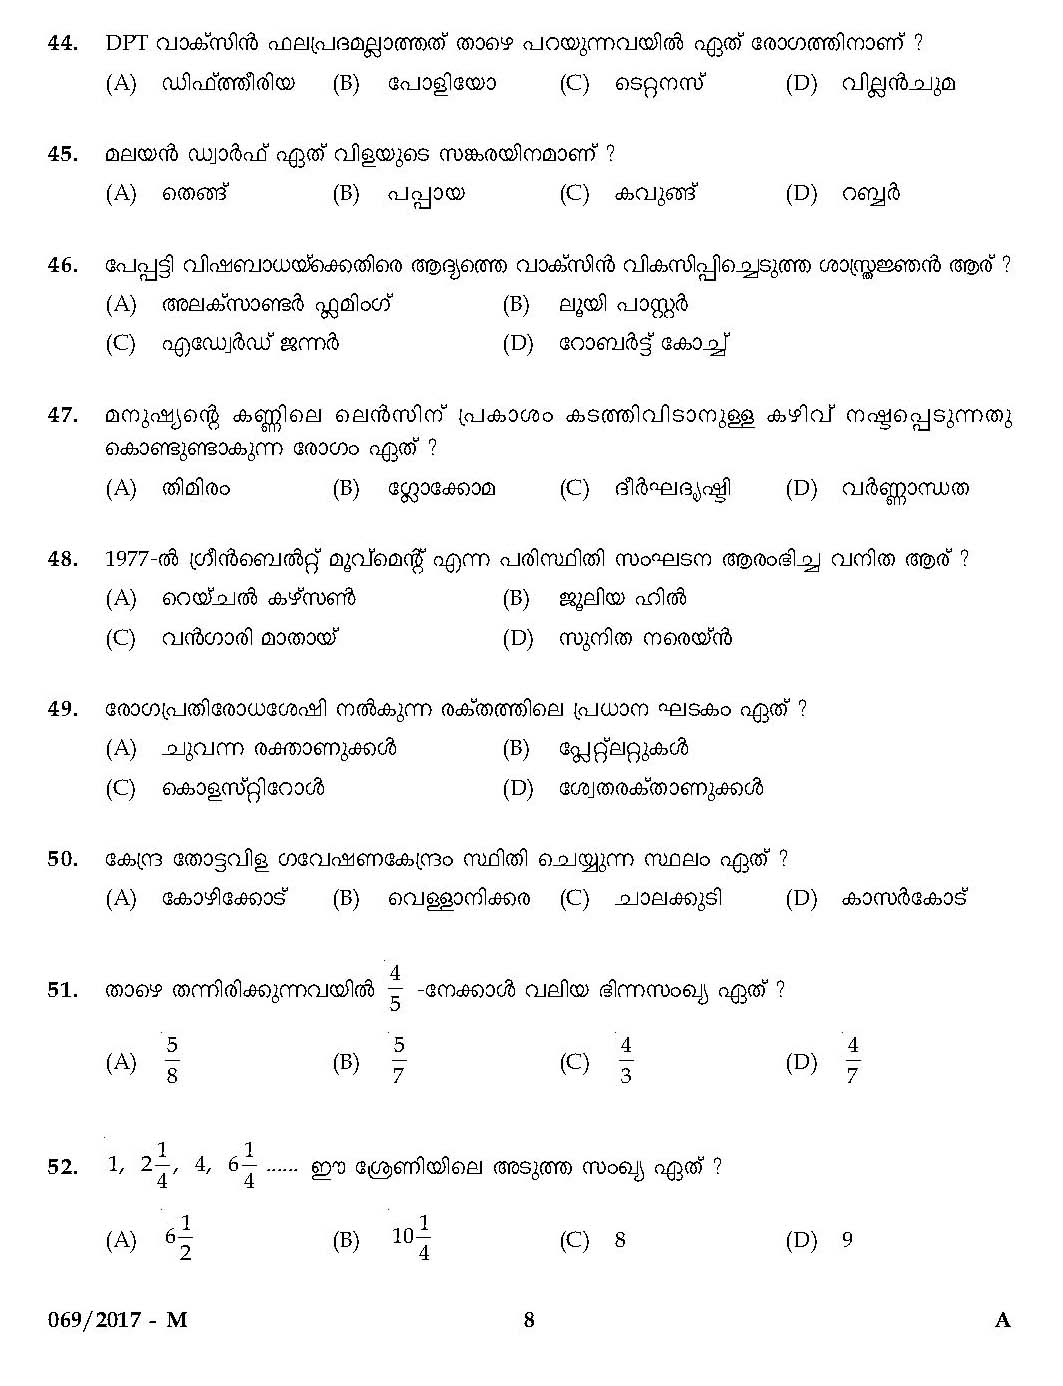 LD Clerk Question Paper 2017 Malayalam Paper Code 0692017 M 7